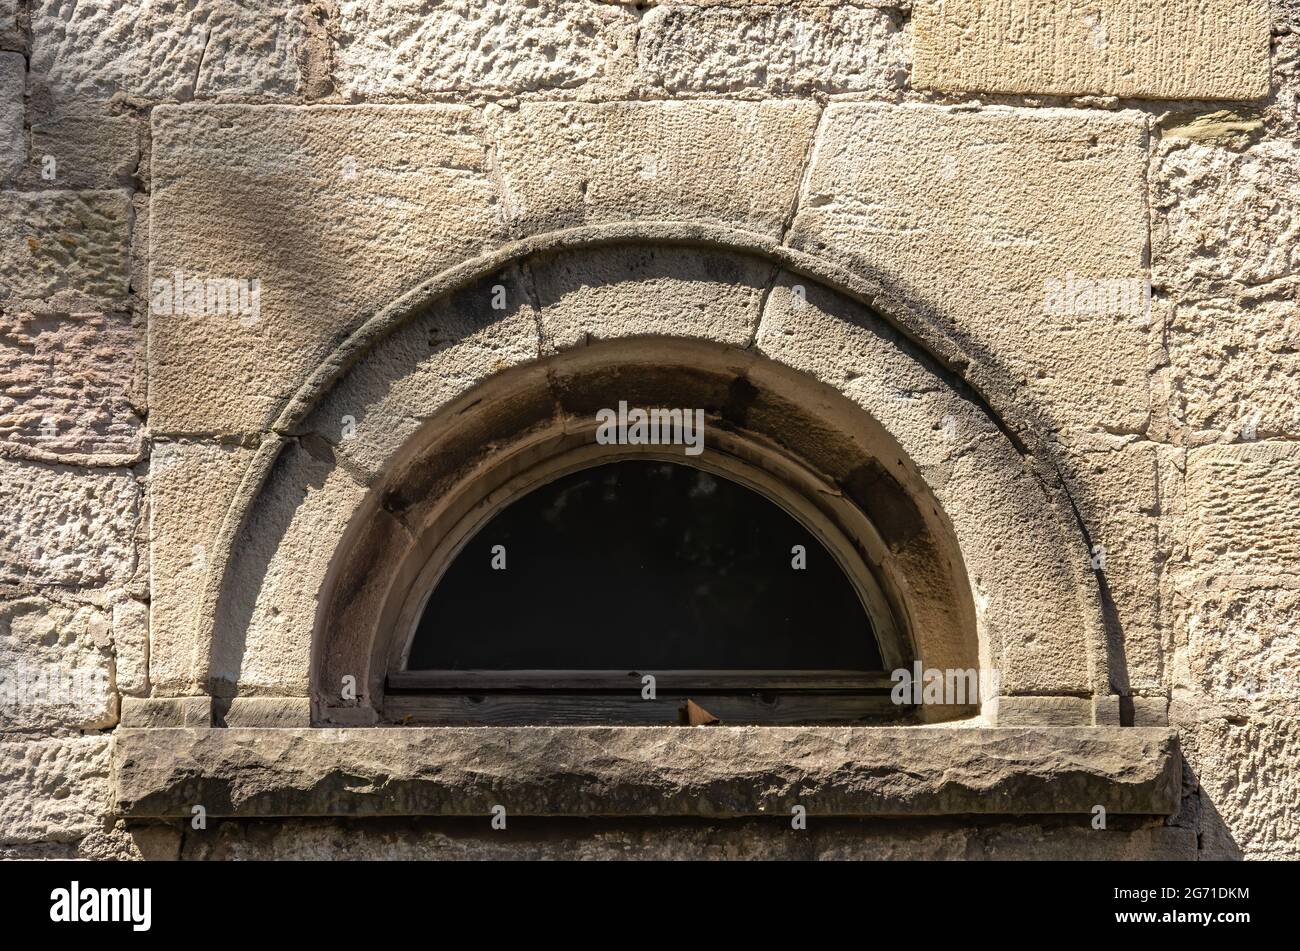 Symbolic image: round arch window in a wall structure. Stock Photo